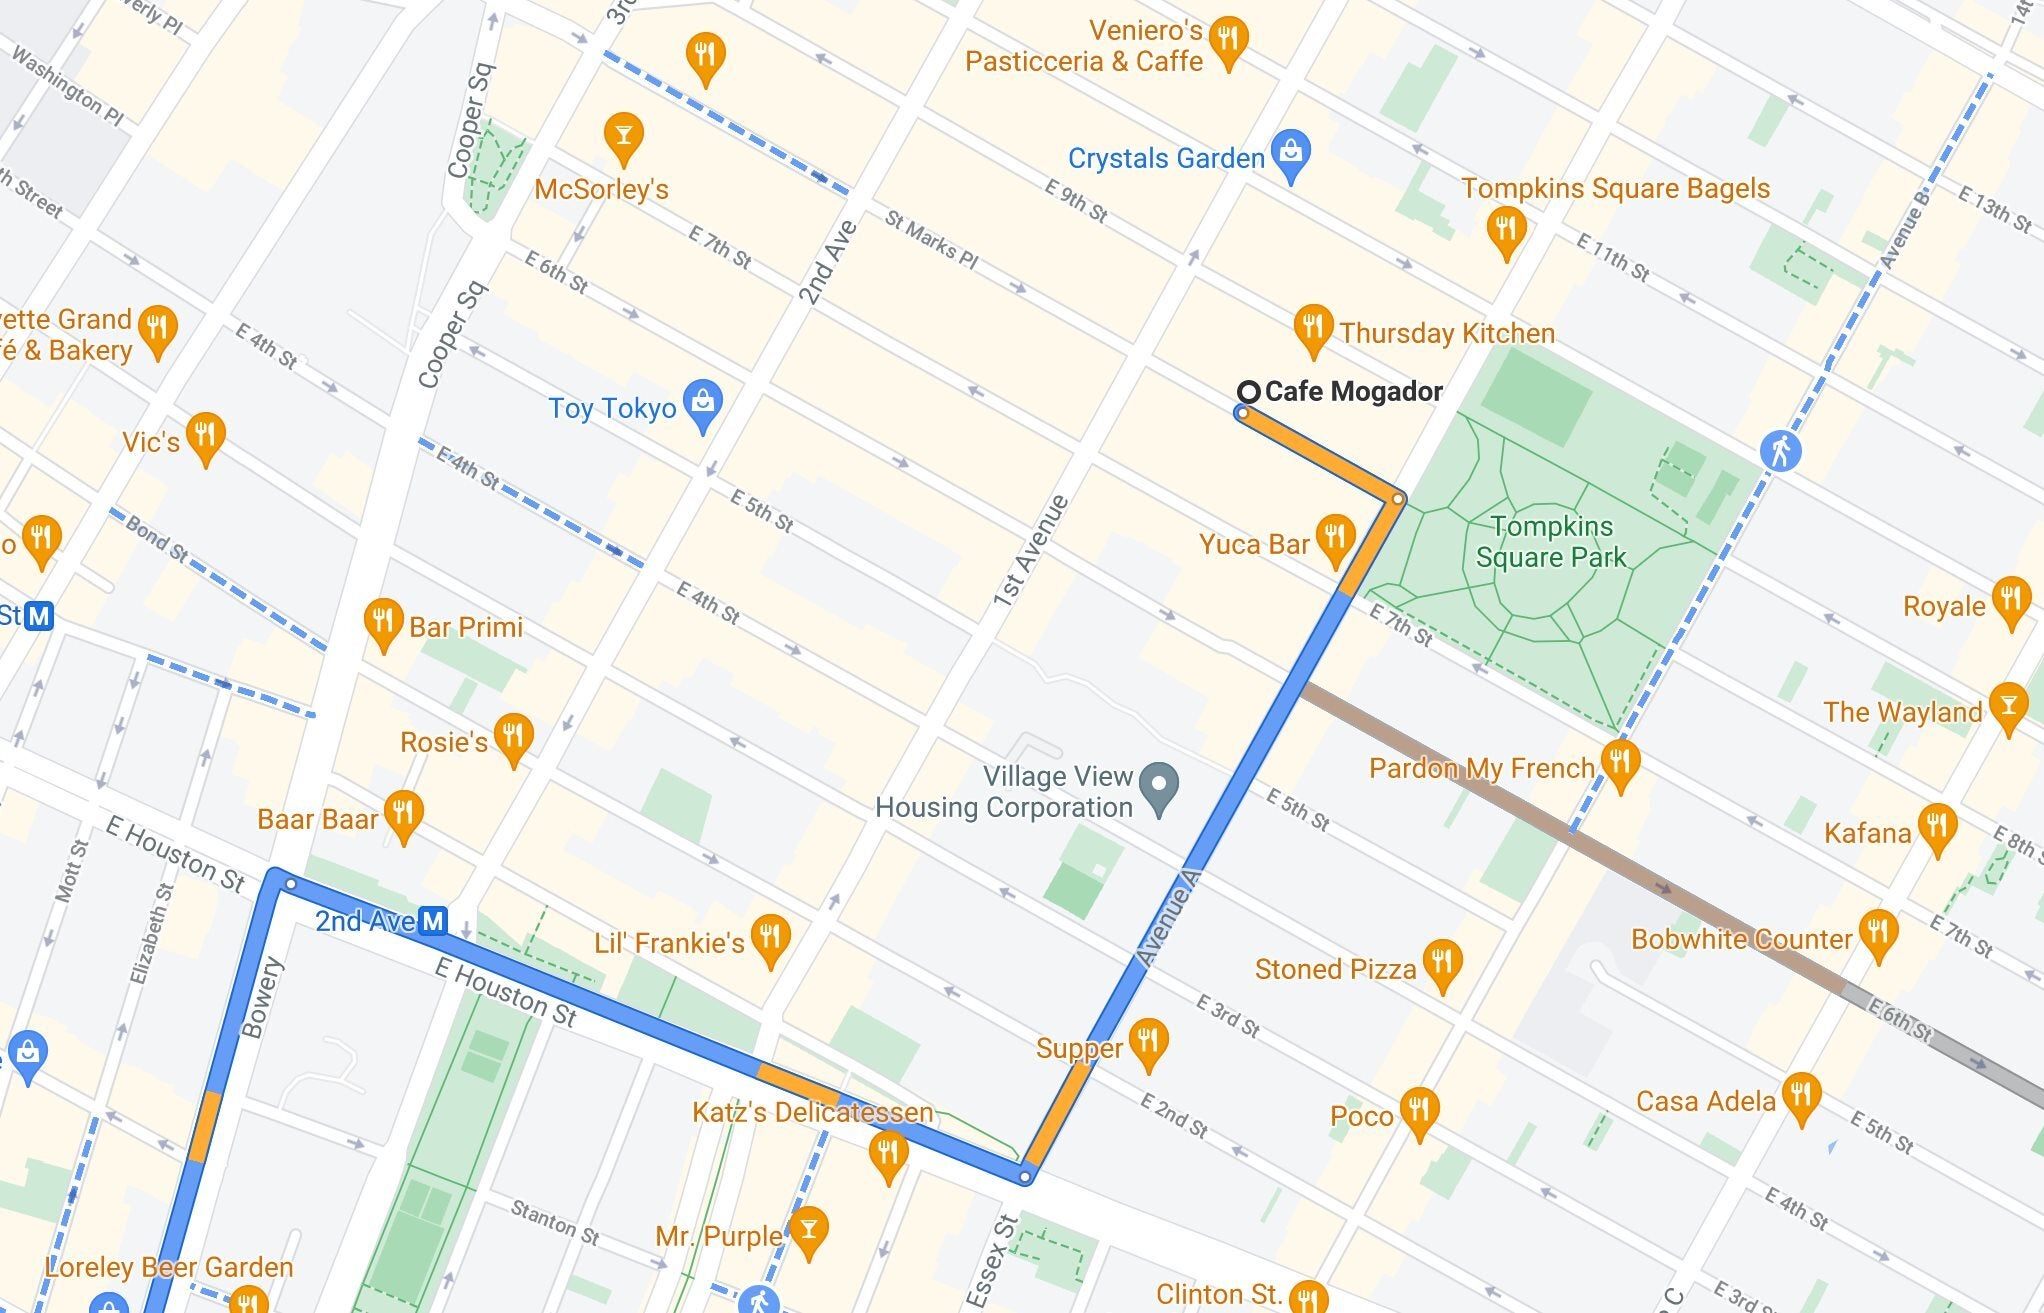 Google Maps will search for a safer route where drivers don't slam on their brakes - New Google Maps feature directs drivers away from accident-prone routes